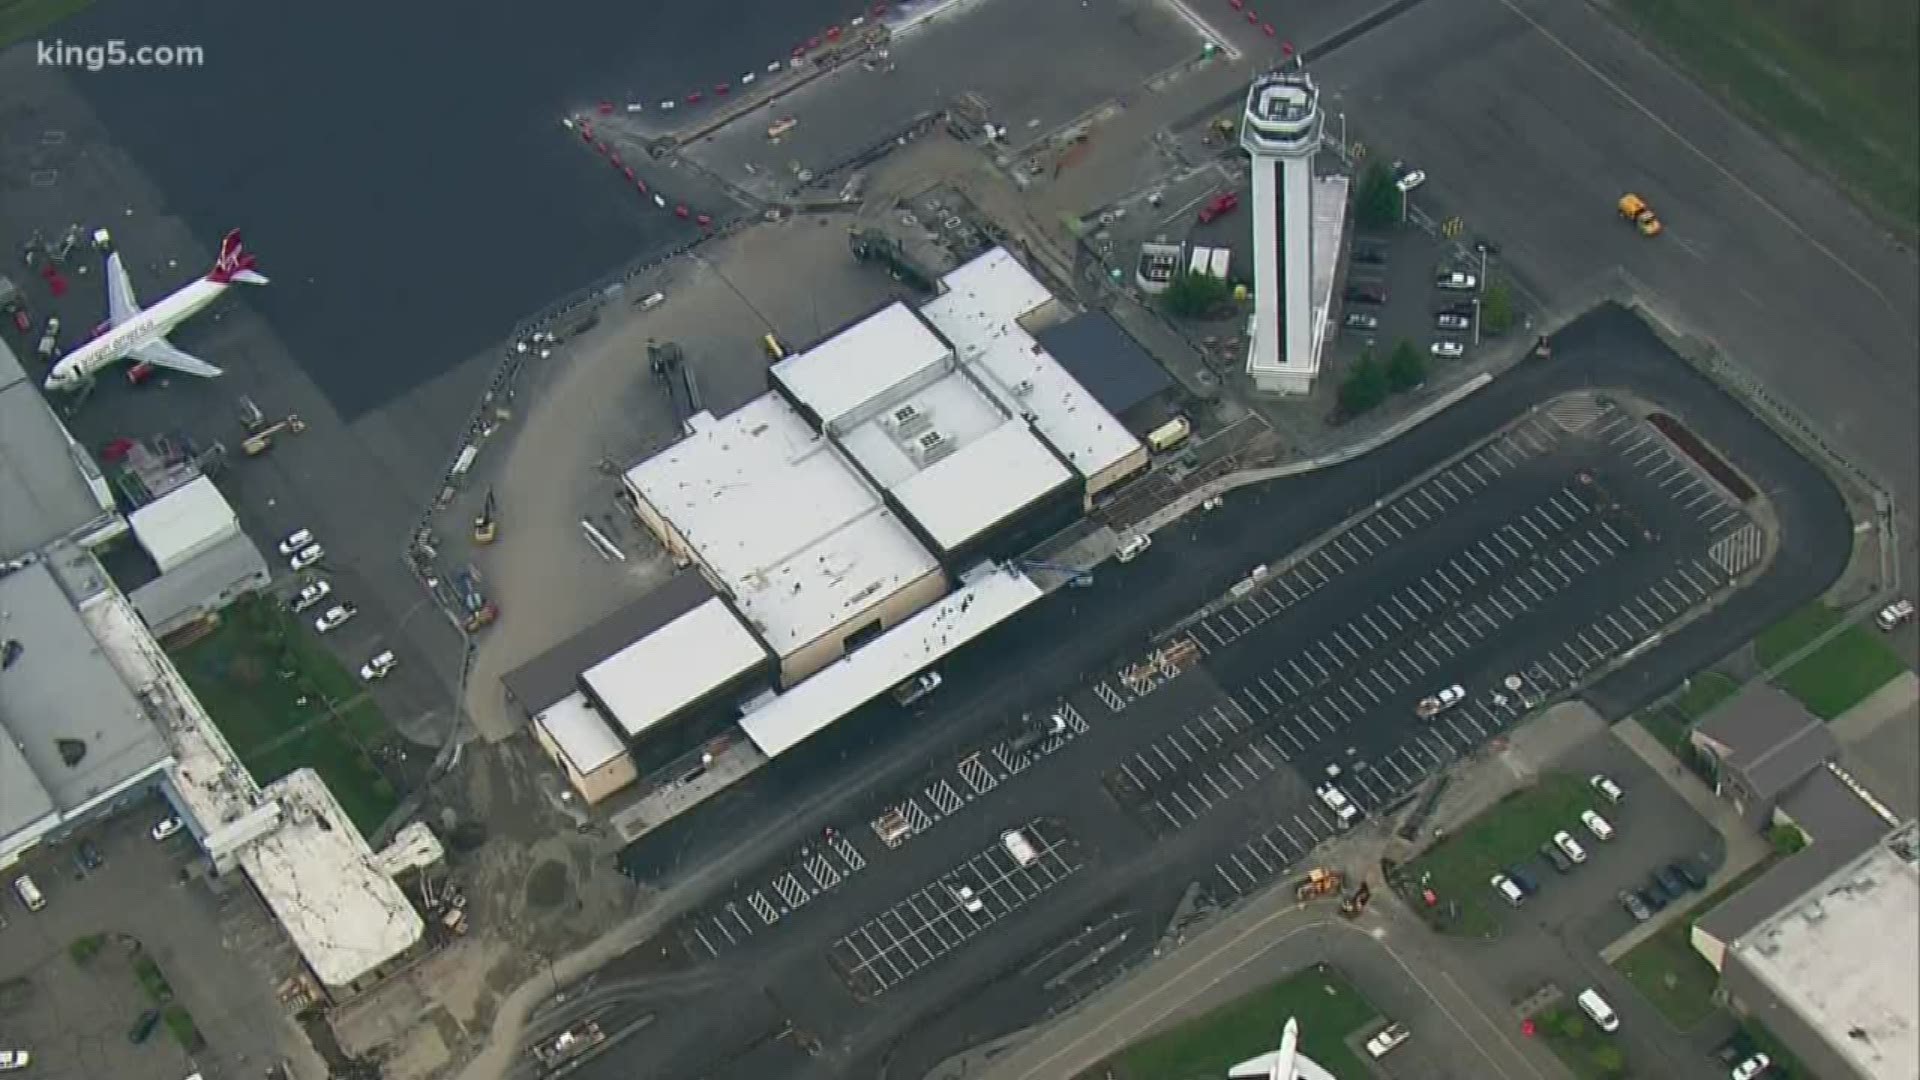 Alaska Airlines has delayed their commercial flights out of Everett until March 4th.